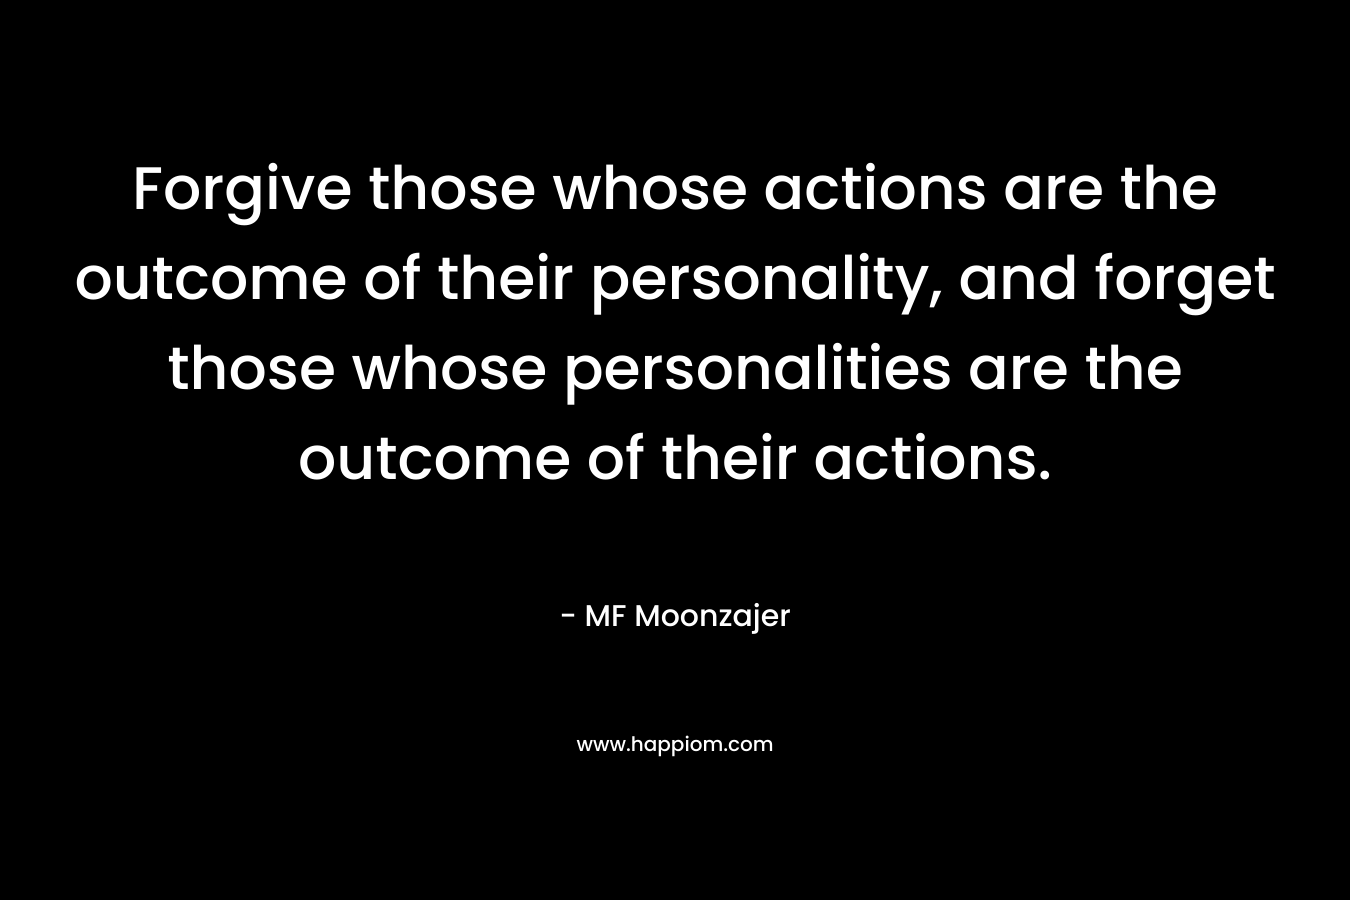 Forgive those whose actions are the outcome of their personality, and forget those whose personalities are the outcome of their actions.